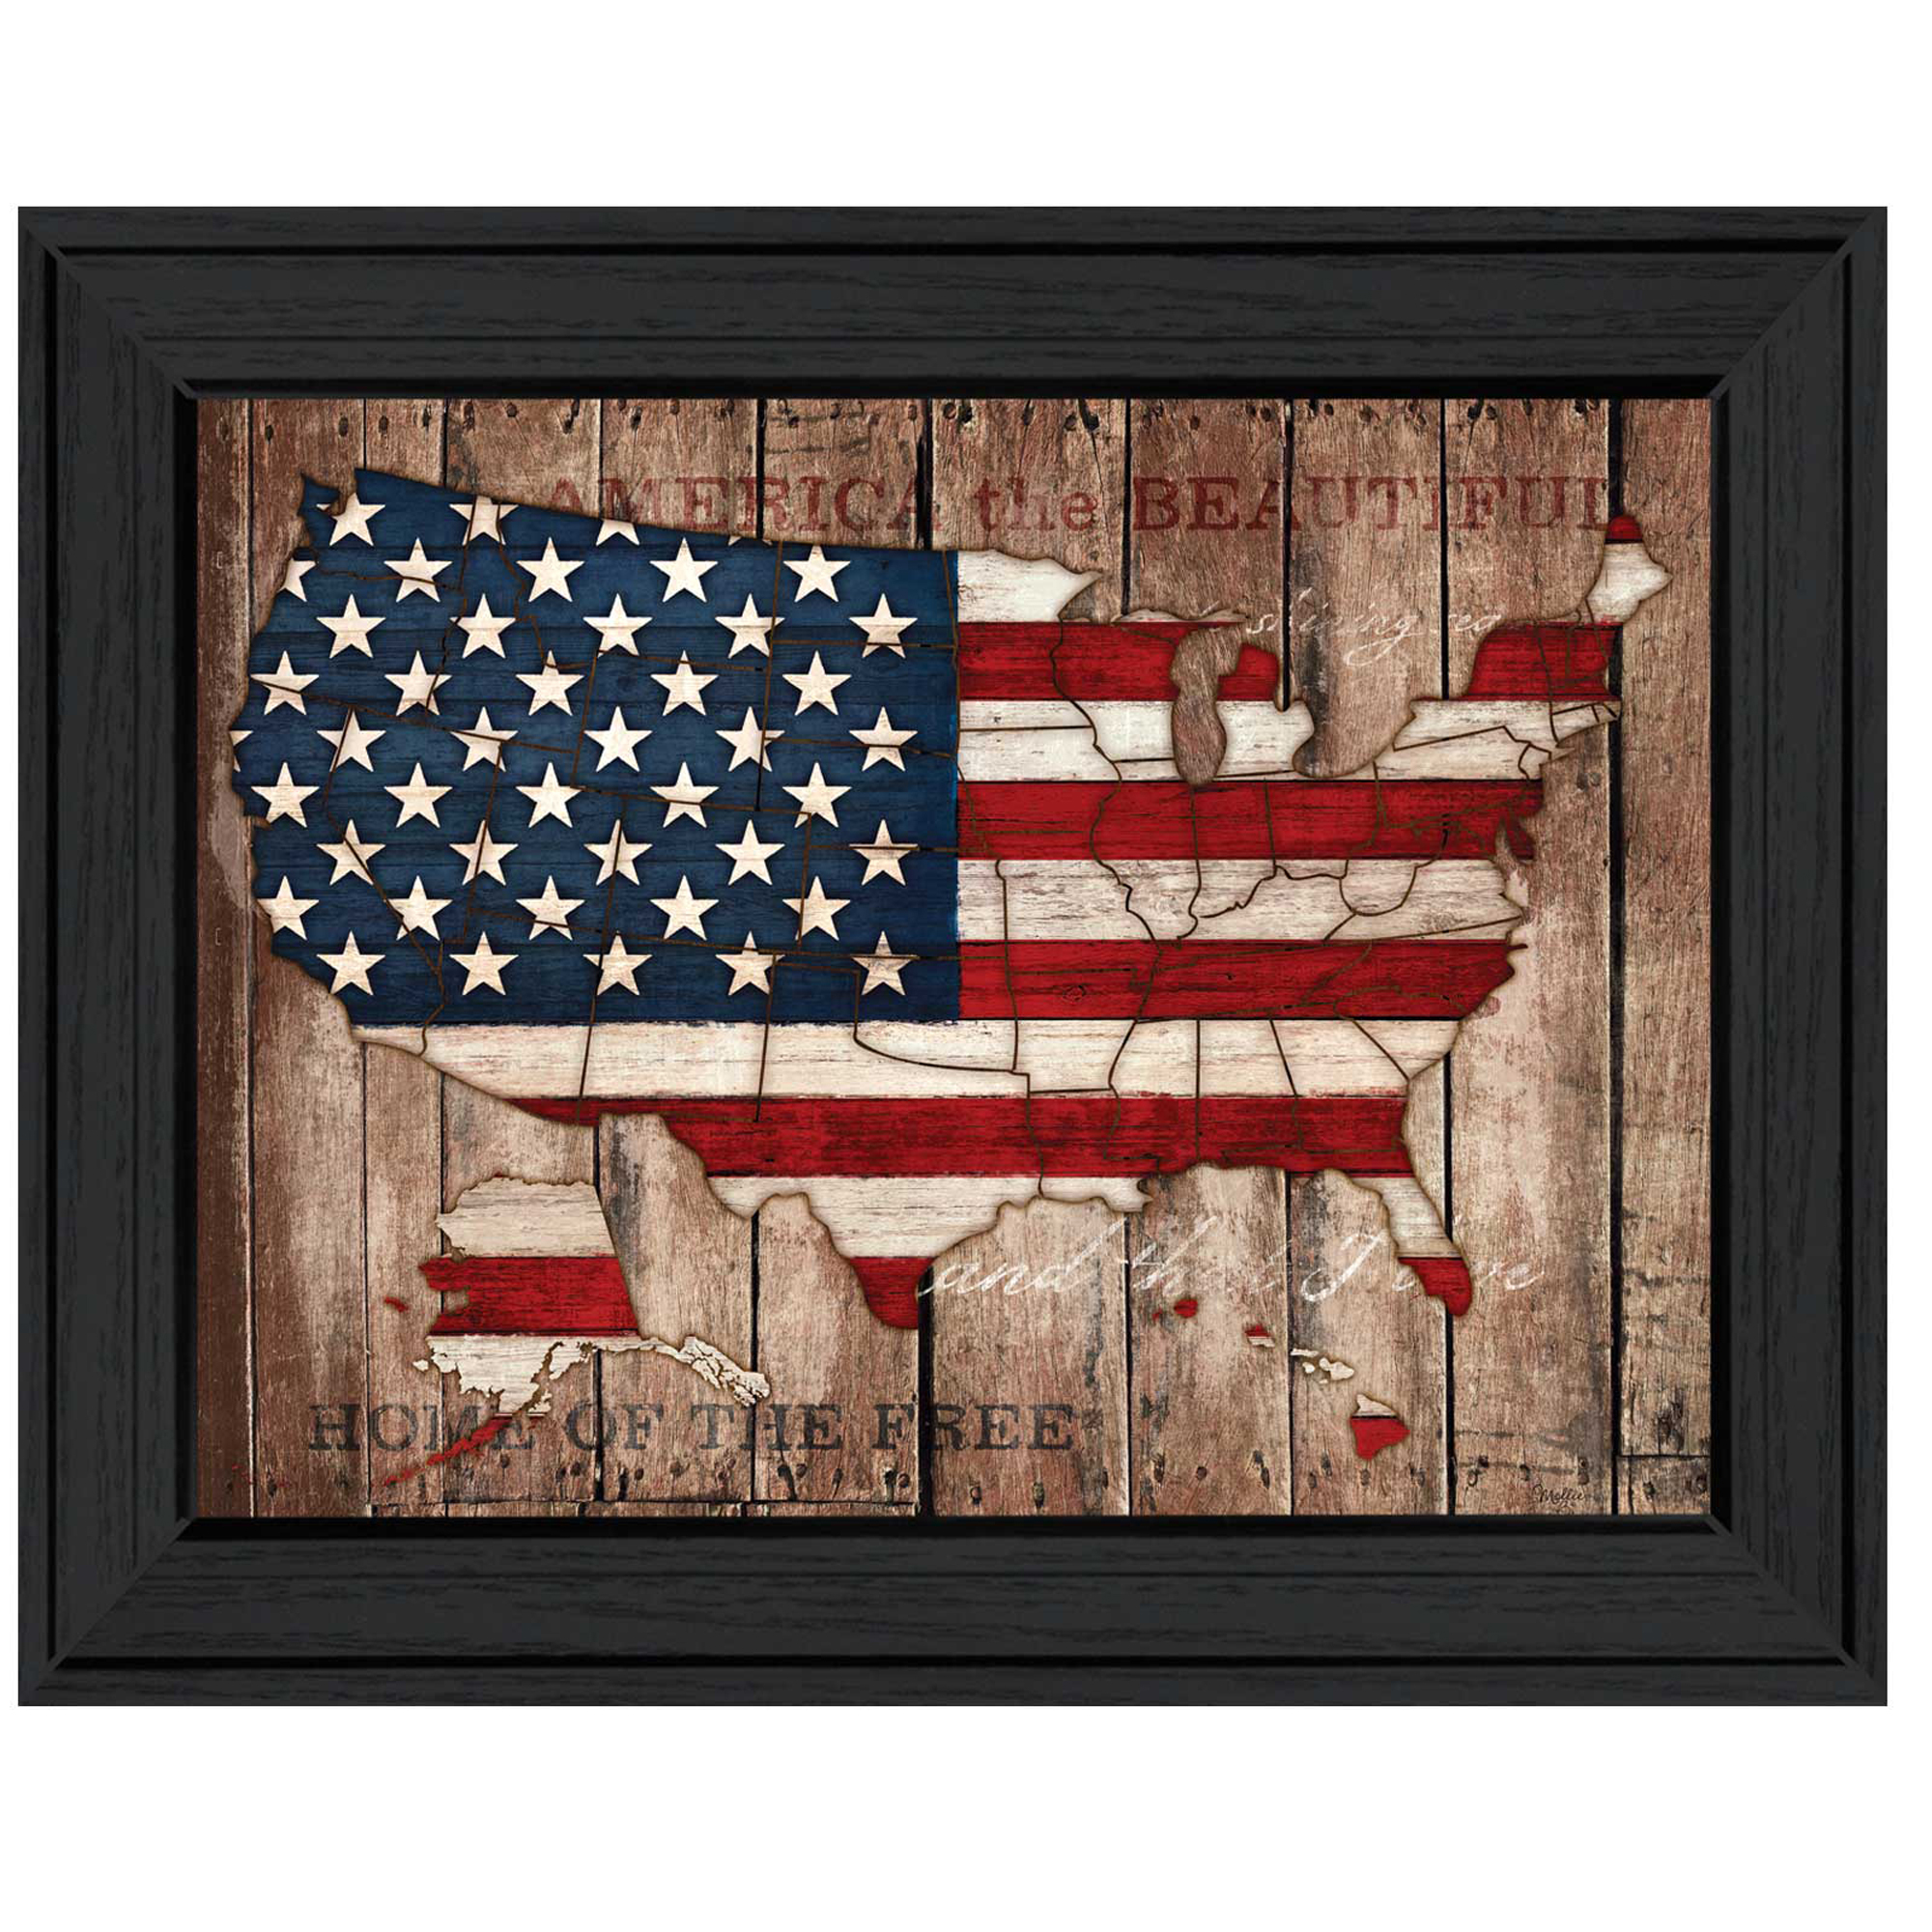 "America The Beautiful" By Mollie B., Printed Wall Art, Ready To Hang Framed Poster, Black Frame